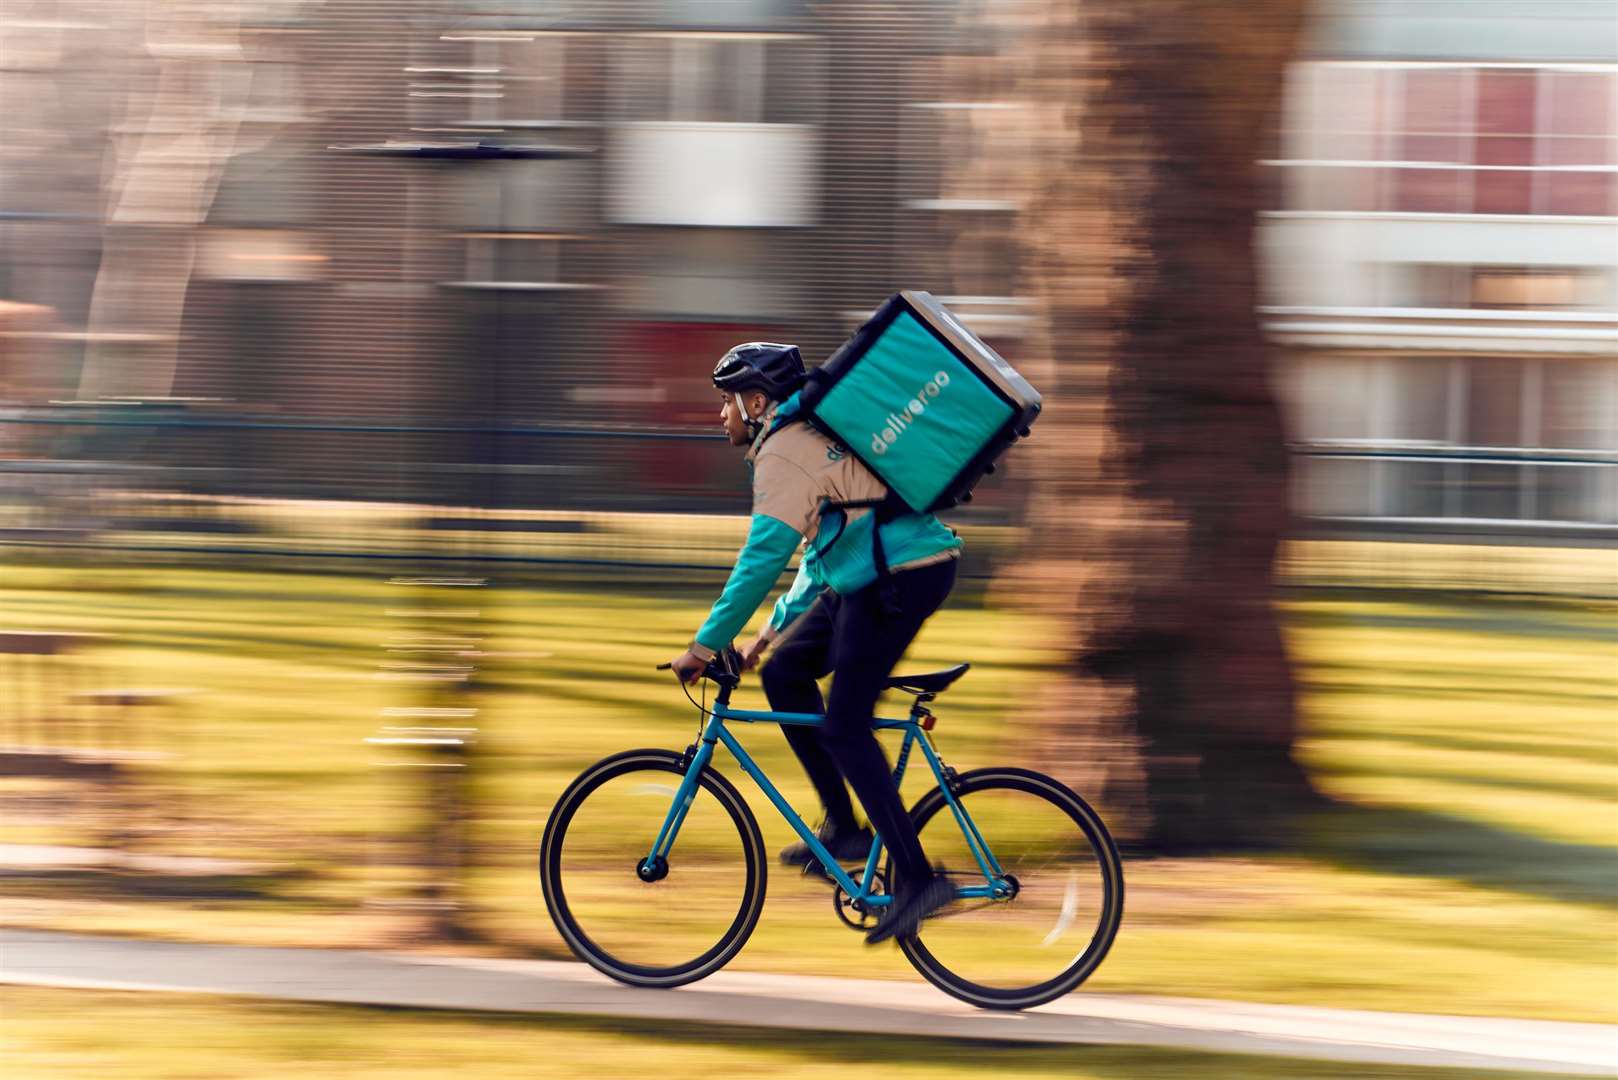 Deliveroo will be coming to Gravesend, and has already been set up in several Kent towns. Picture: Deliveroo